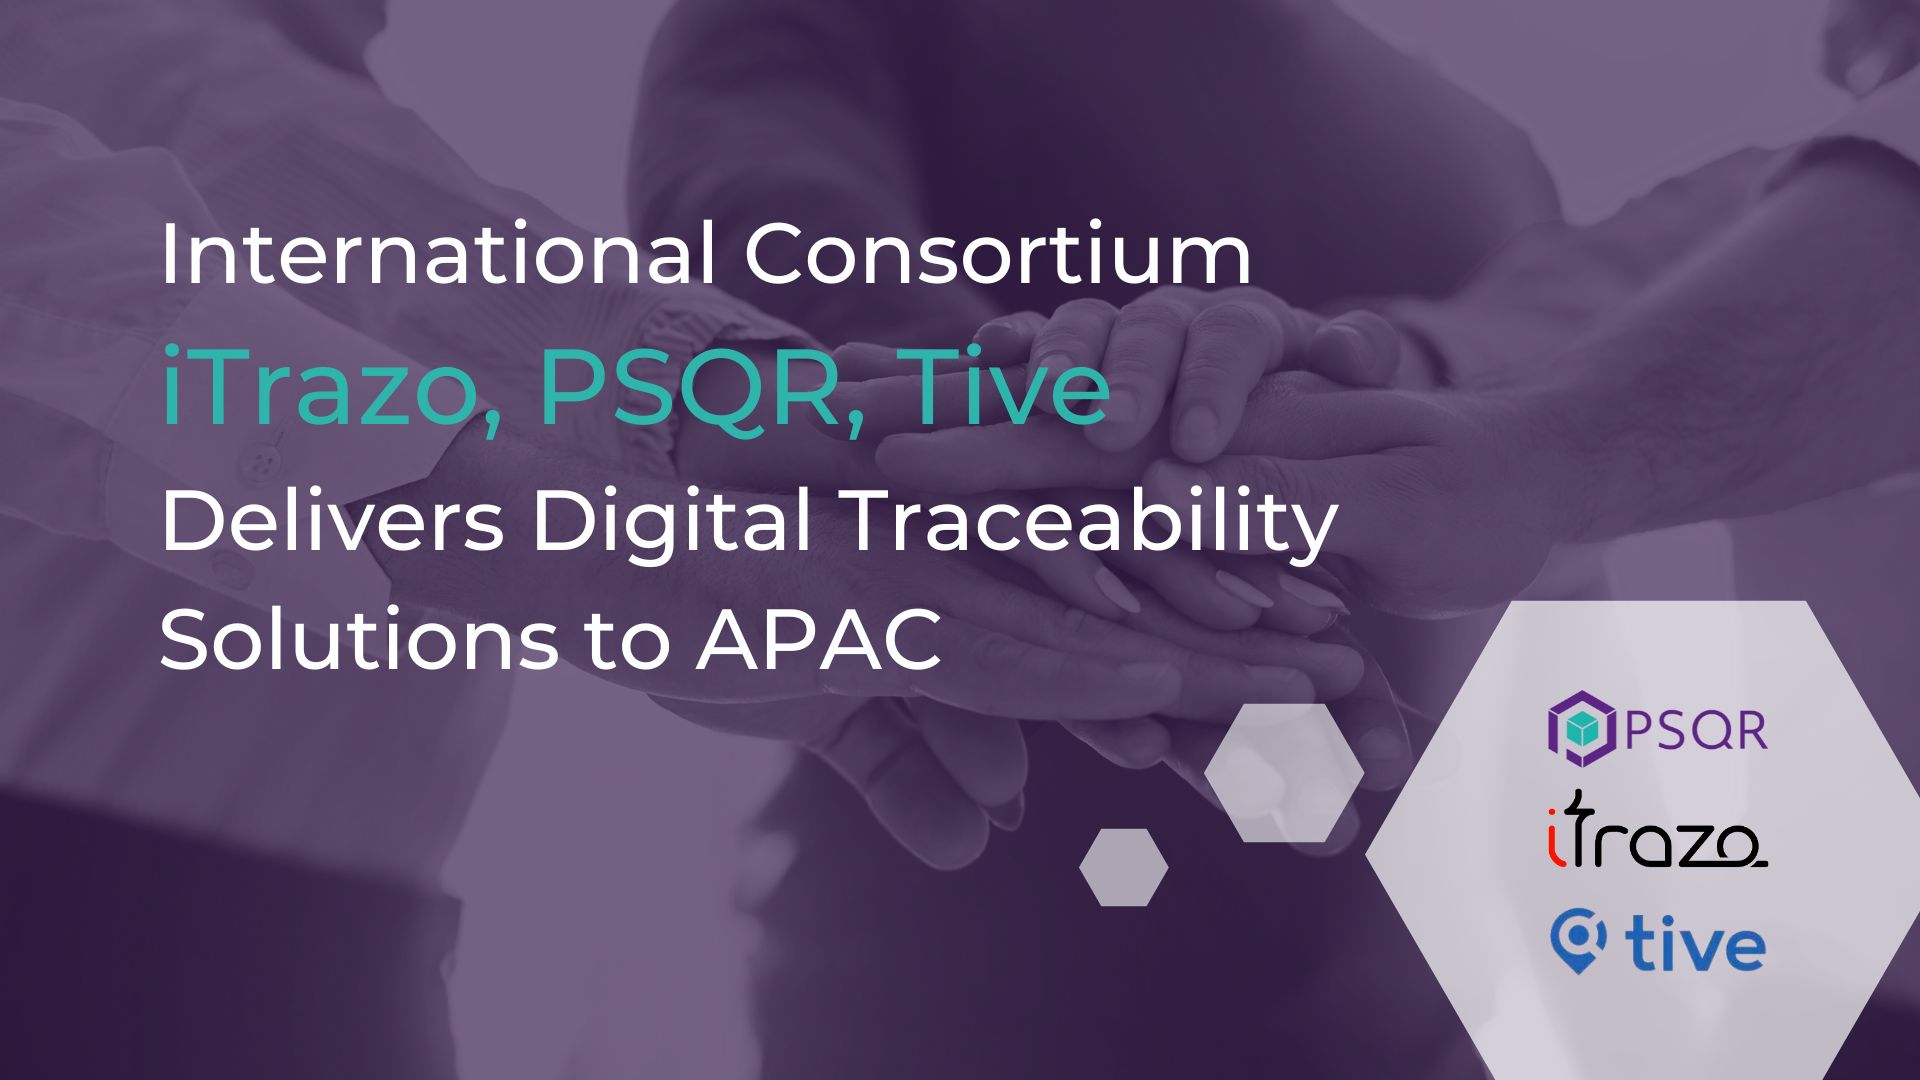 International Consortium Delivers Digital Traceability Solutions to APAC